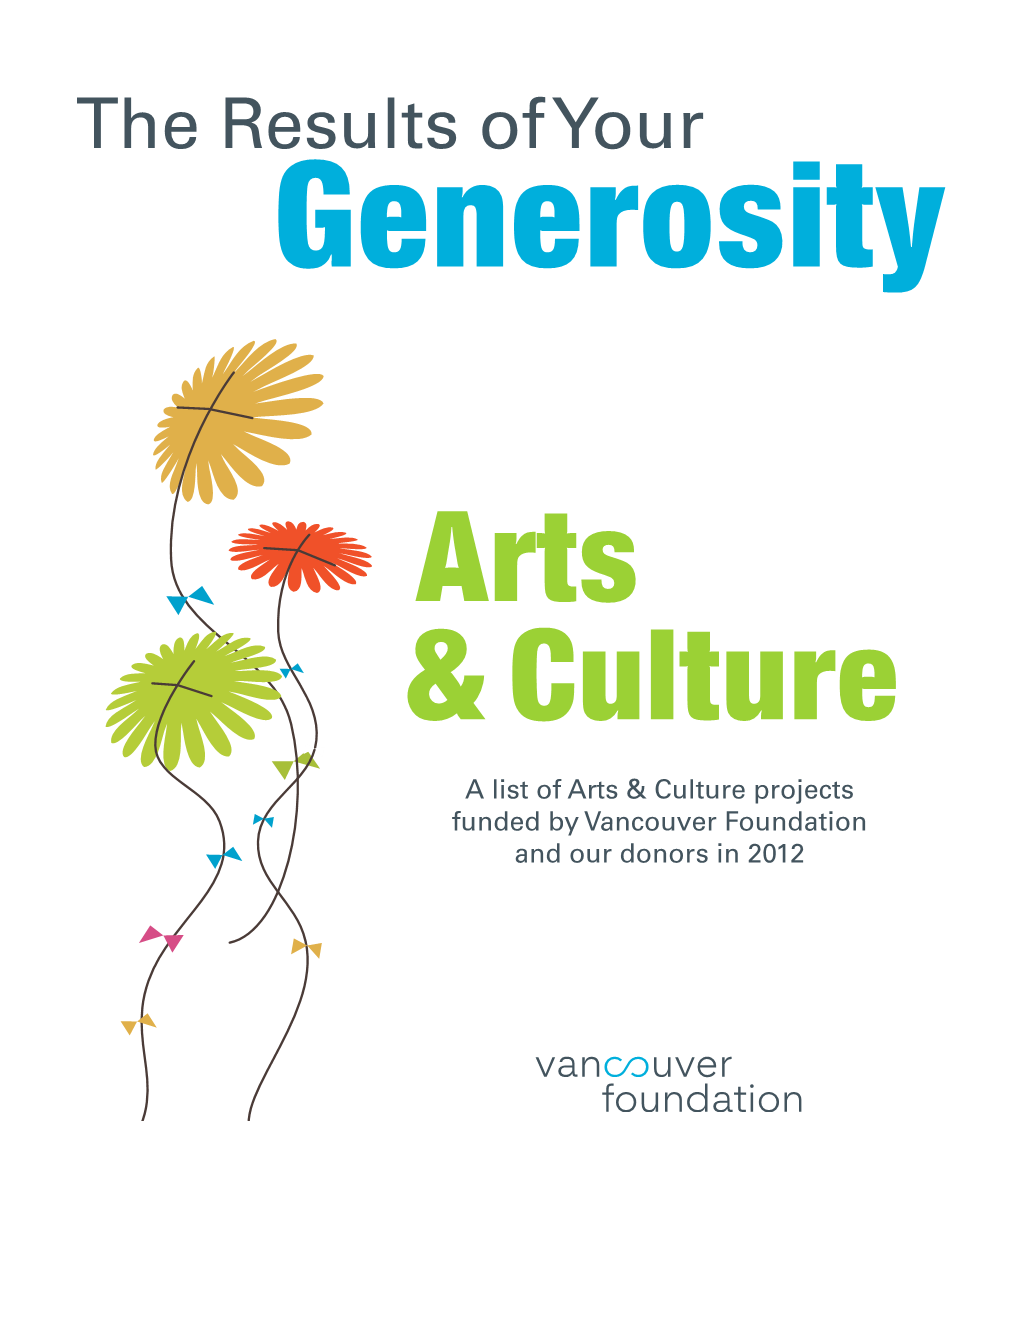 Results of Your Generosity 2012: Arts and Culture